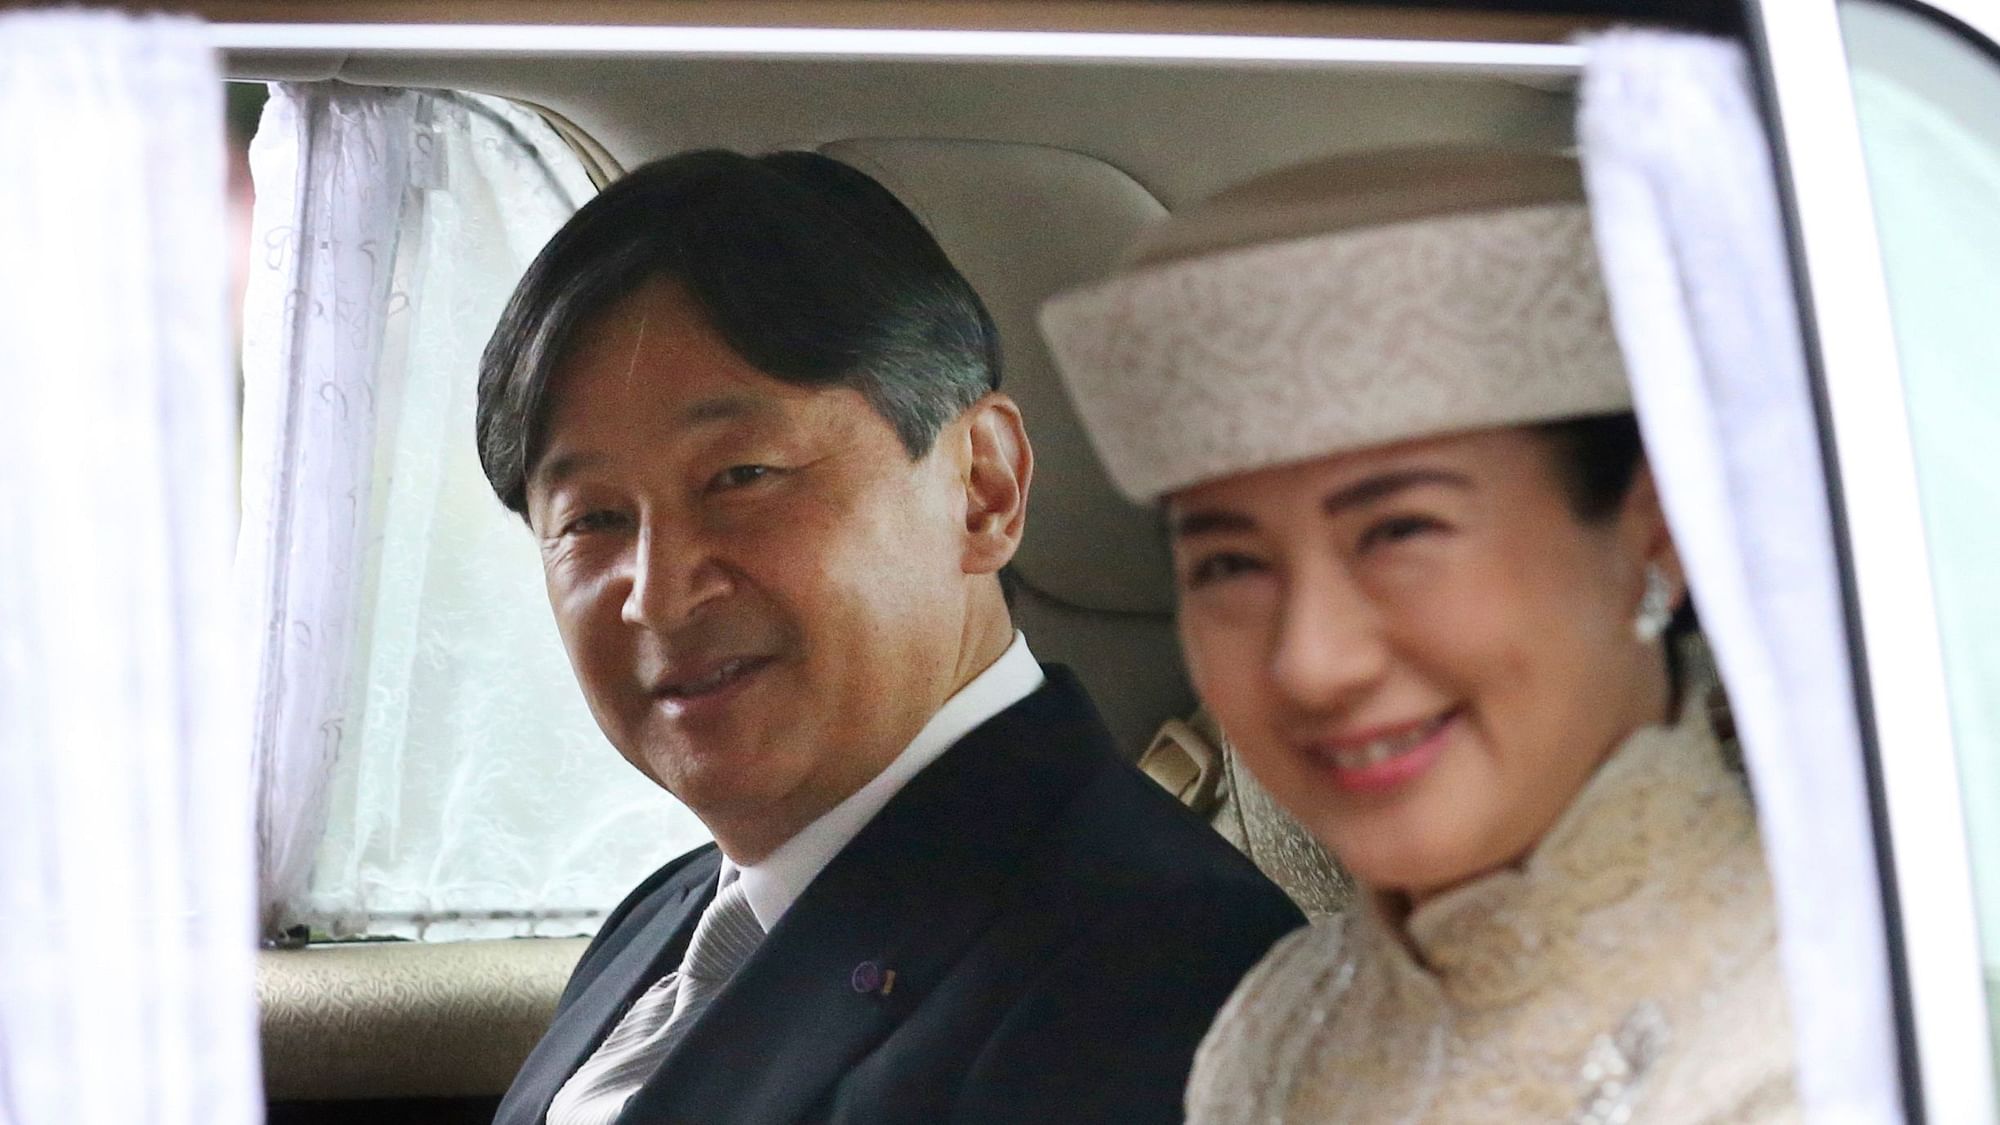 Japan’s Crown Prince Naruhito and Crown Princess Masako arrive at Imperial Palace to attend the ceremony of Emperor Akihito’s abdication in Tokyo, on 30 April.